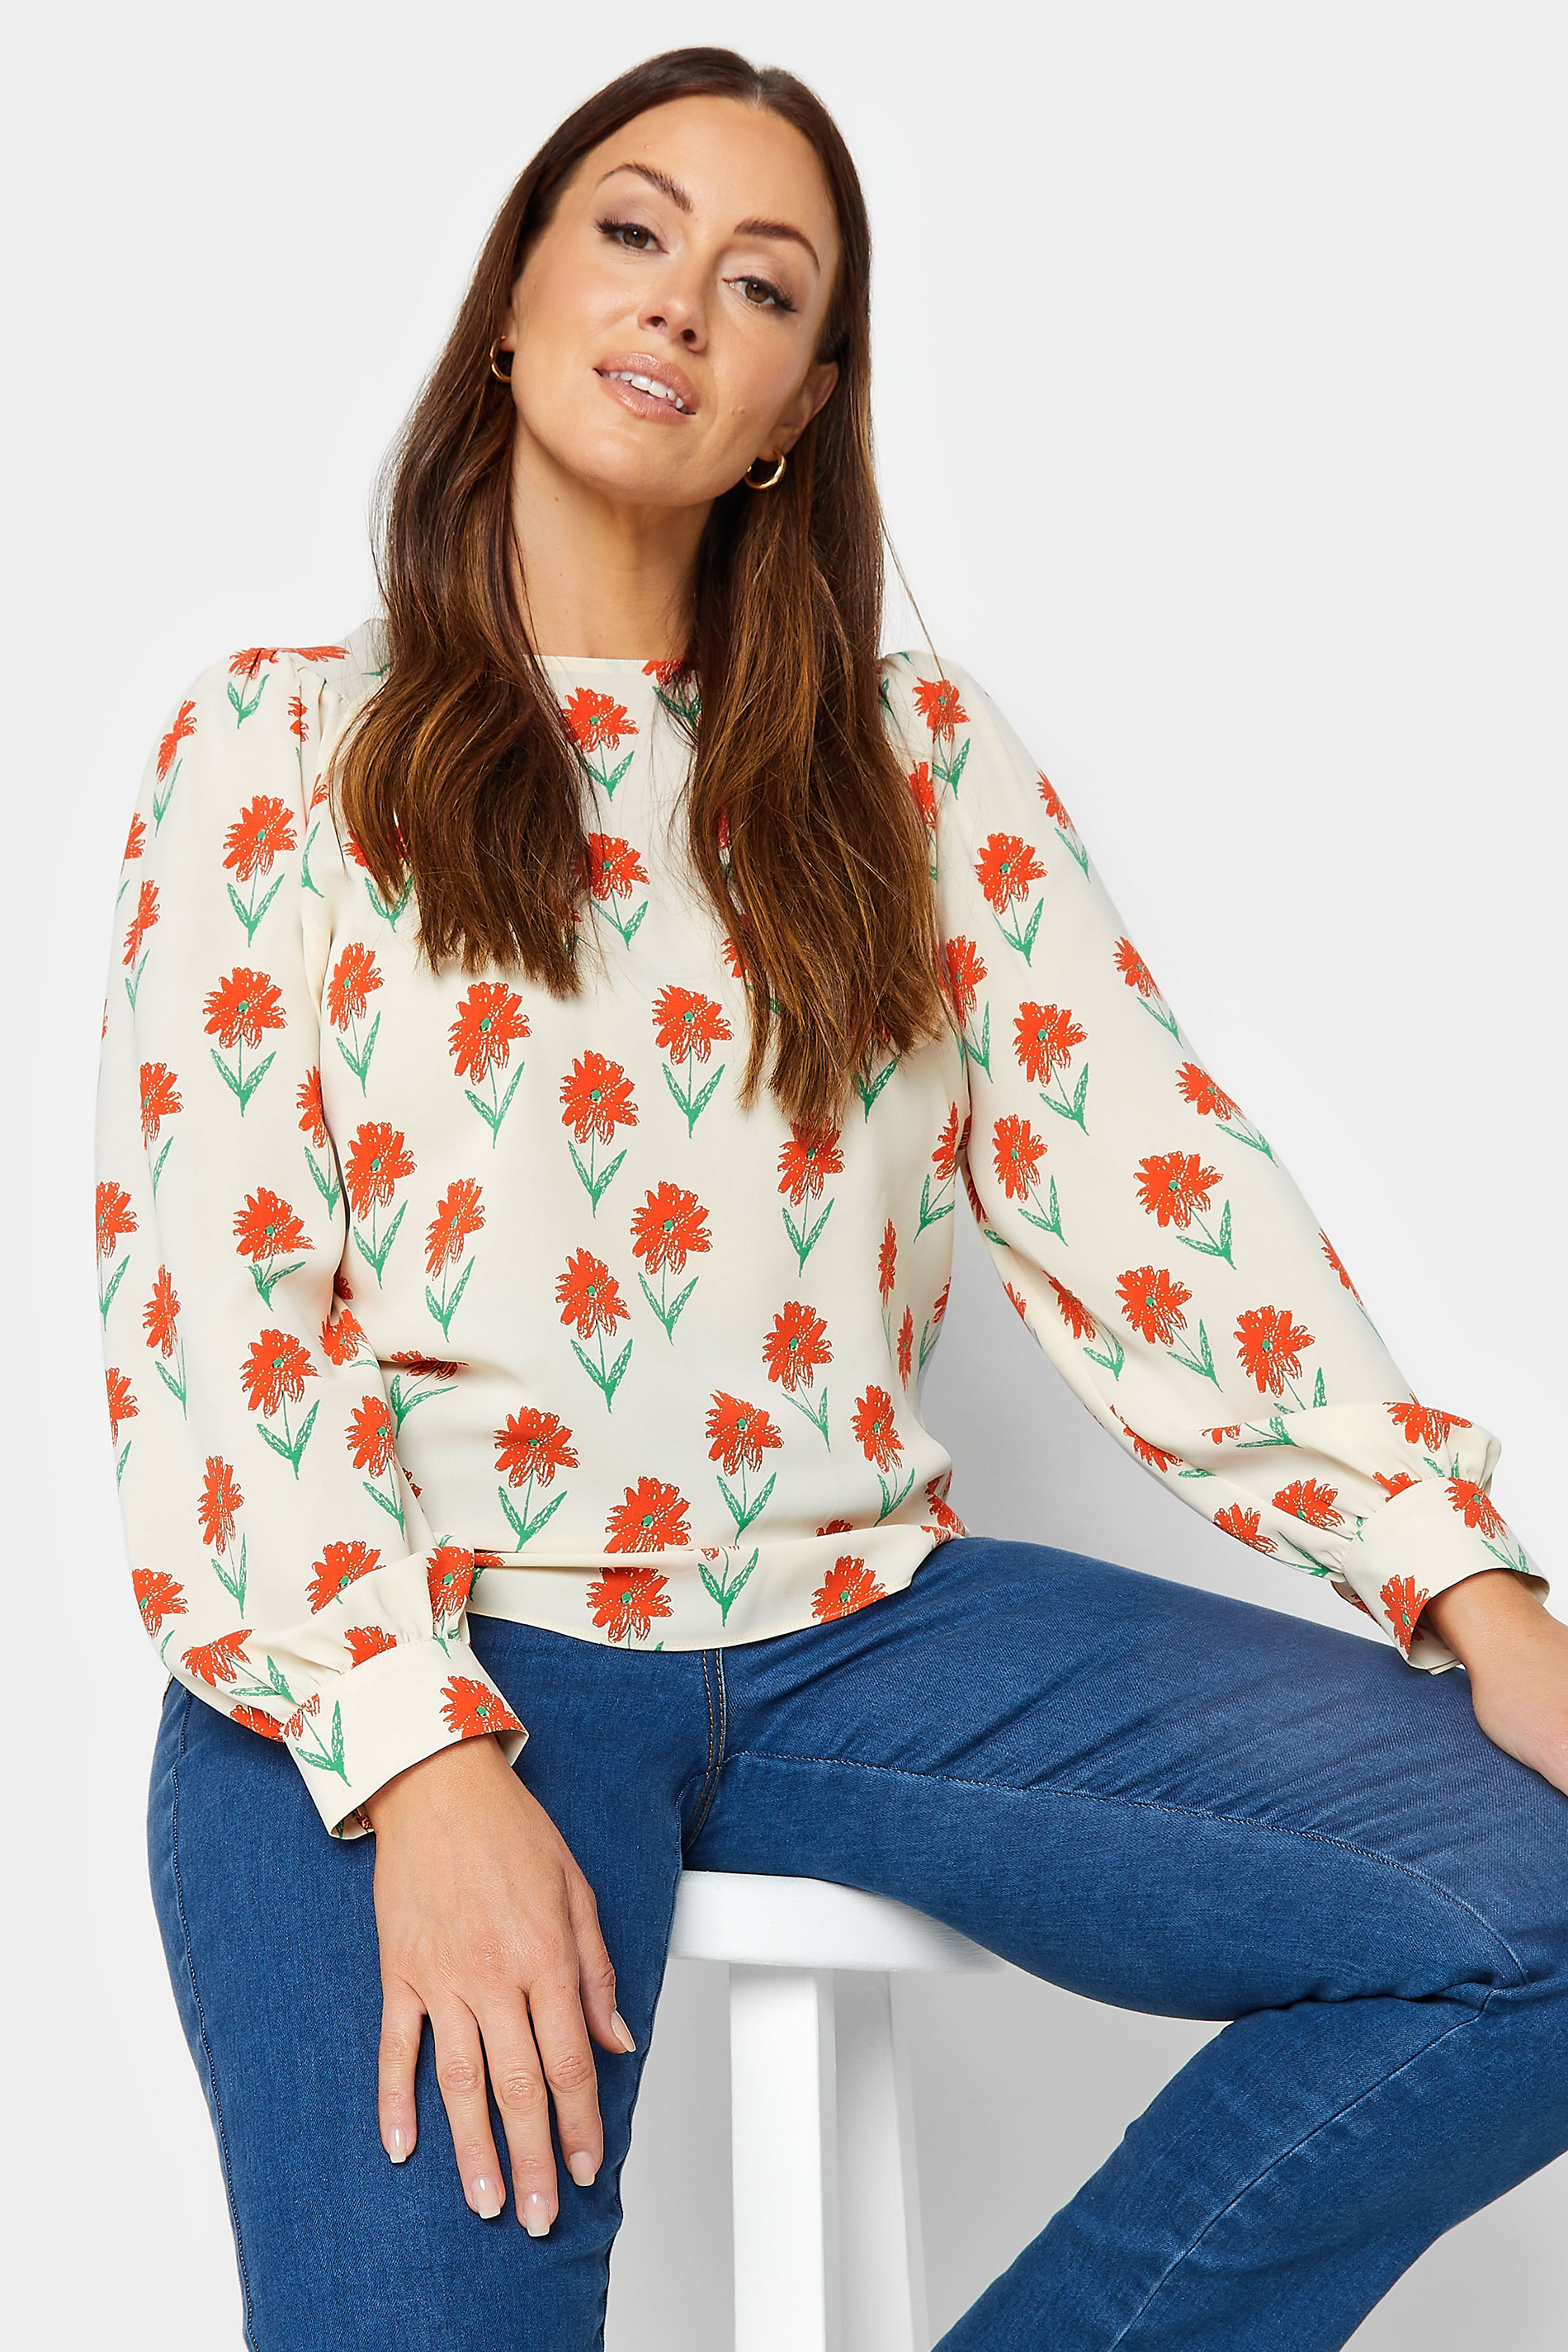 M&Co Ivory White Floral Print Long Sleeve Blouse | M&Co 1